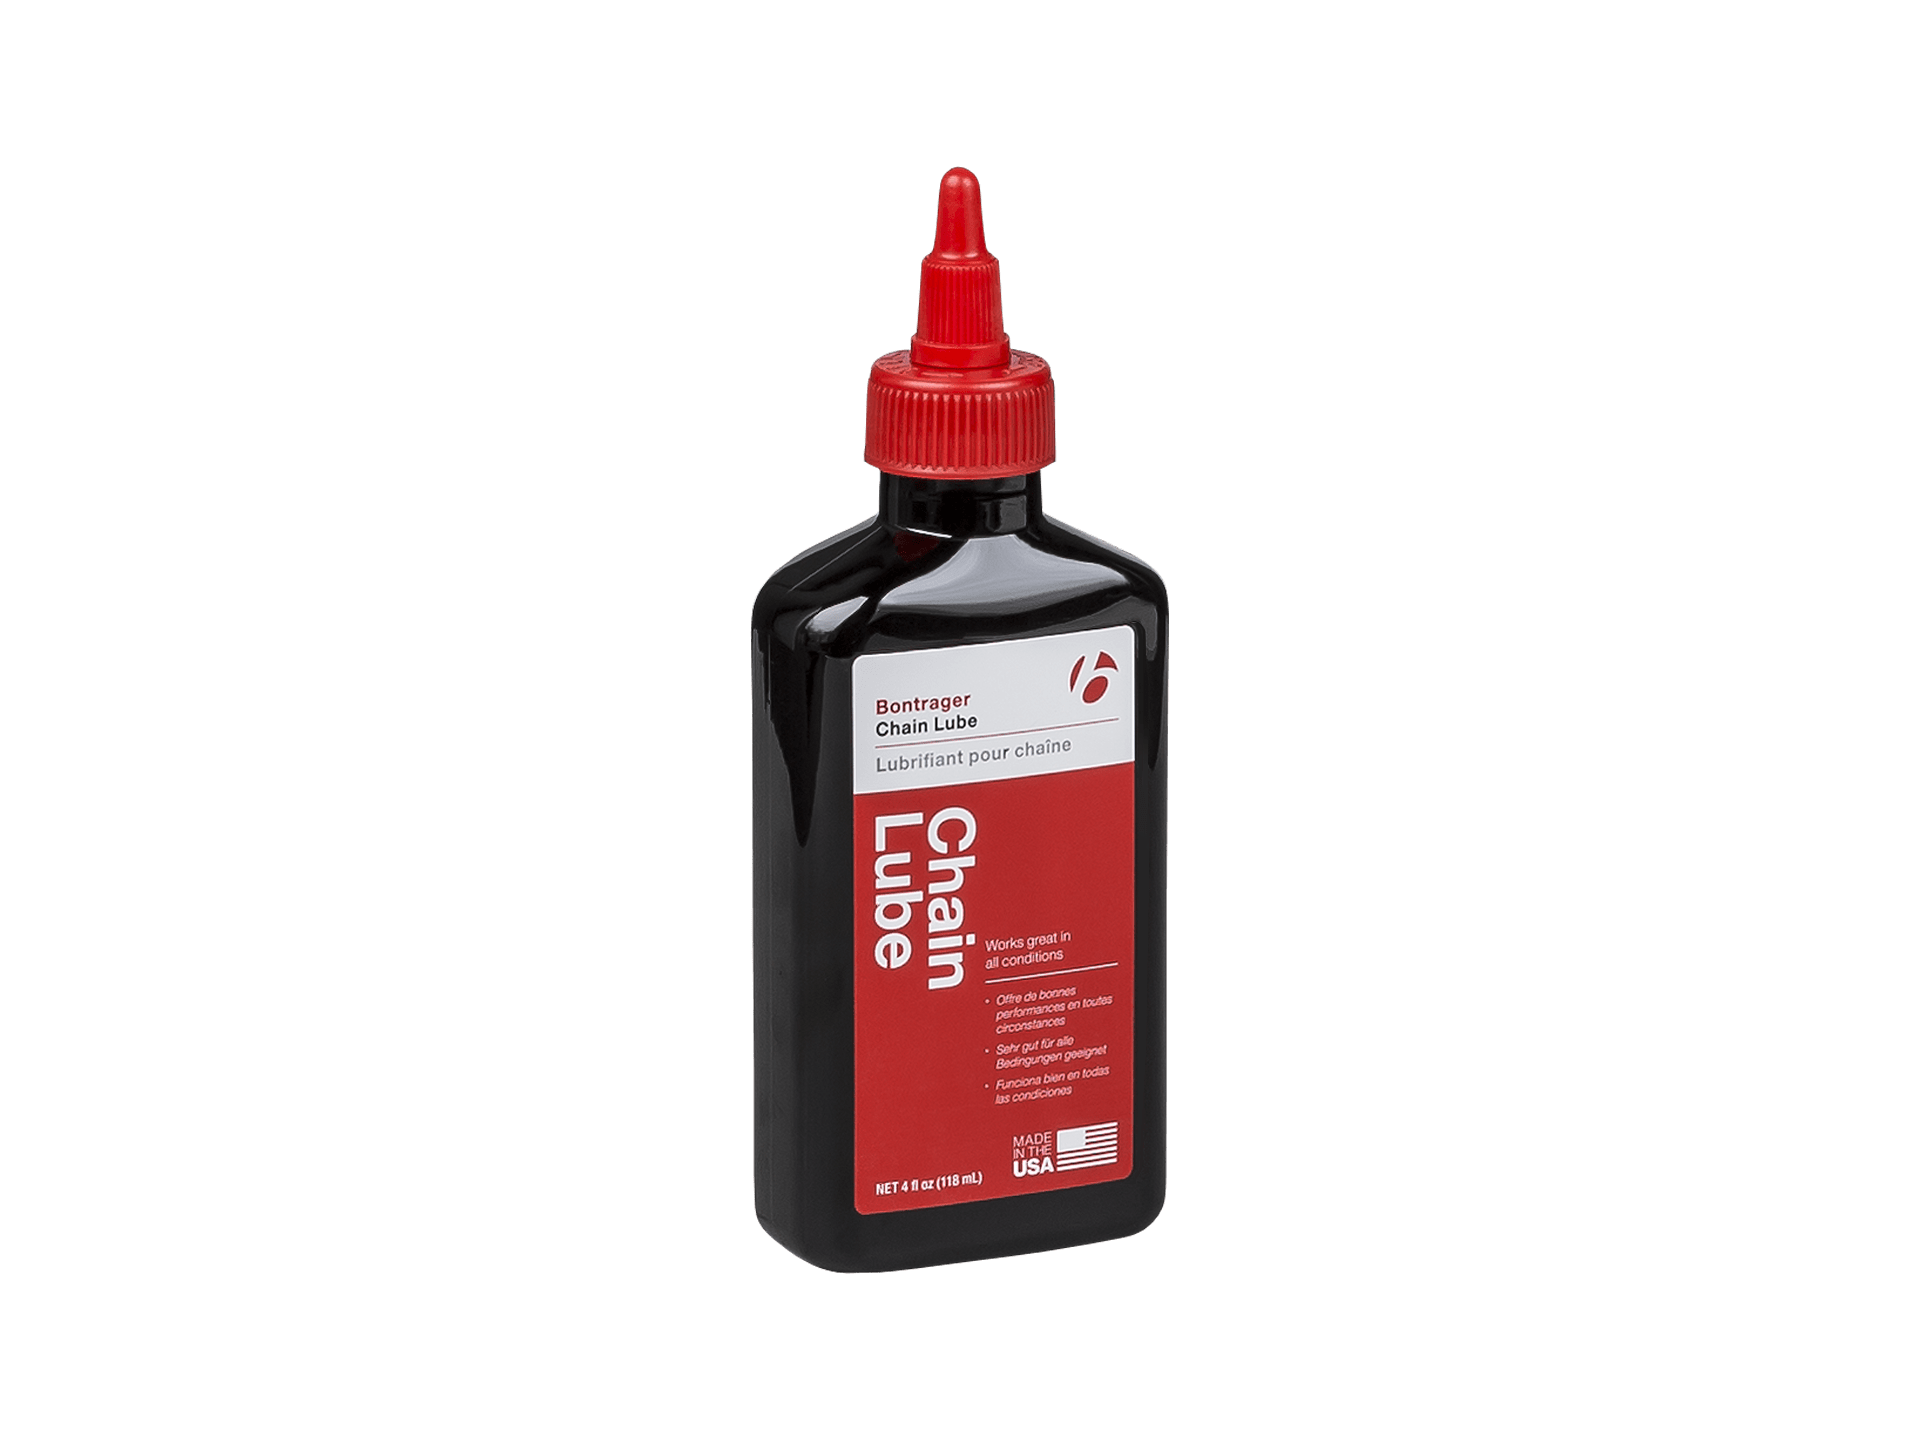 Bontrager Chain Lube